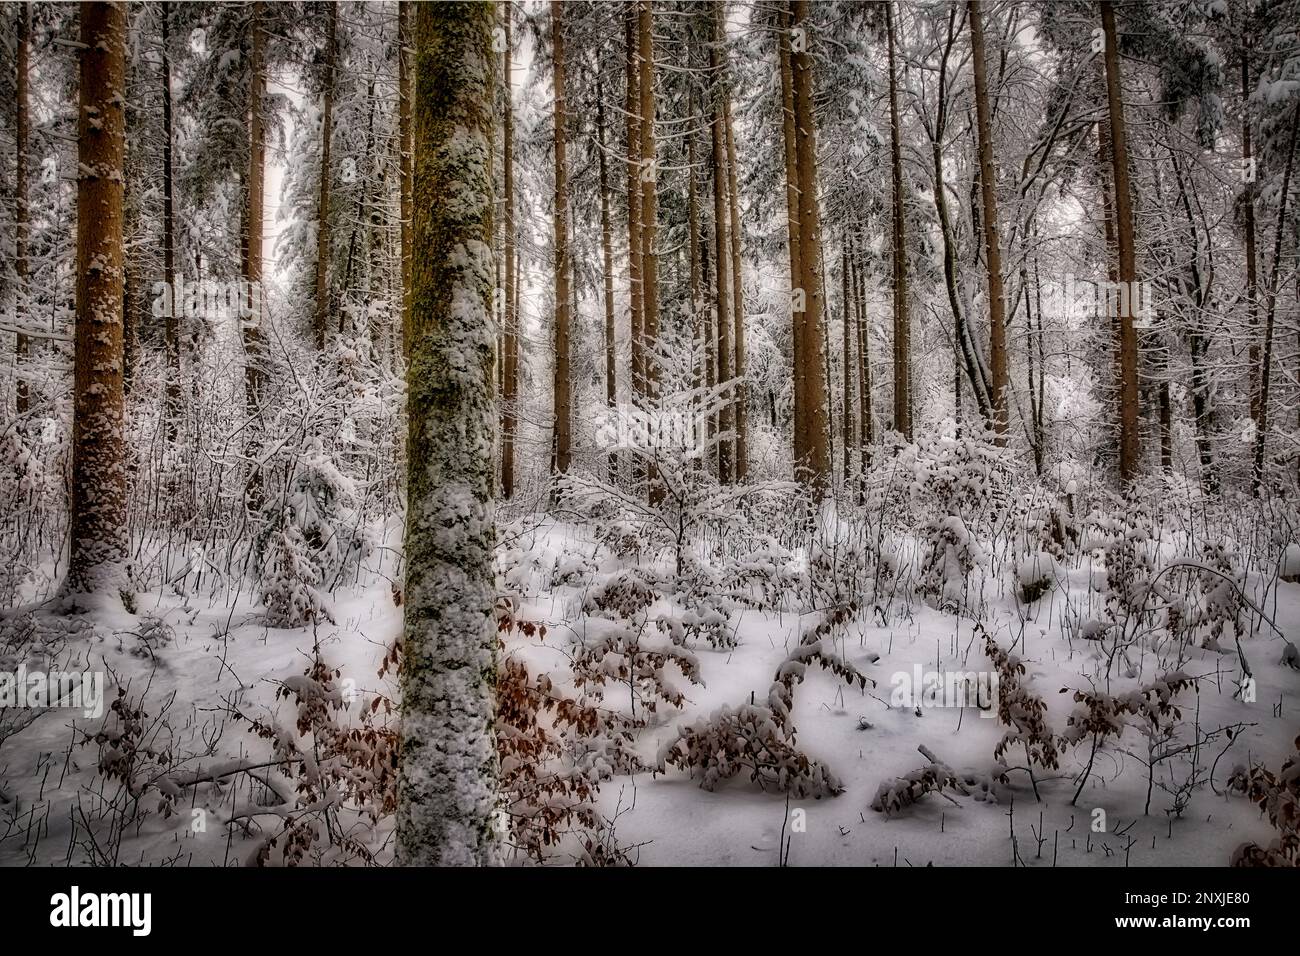 PHOTOGRAPHIC ART: The Mysterious Silence of Trees  (HDR-Image by Edmund Nagele FRPS) Stock Photo